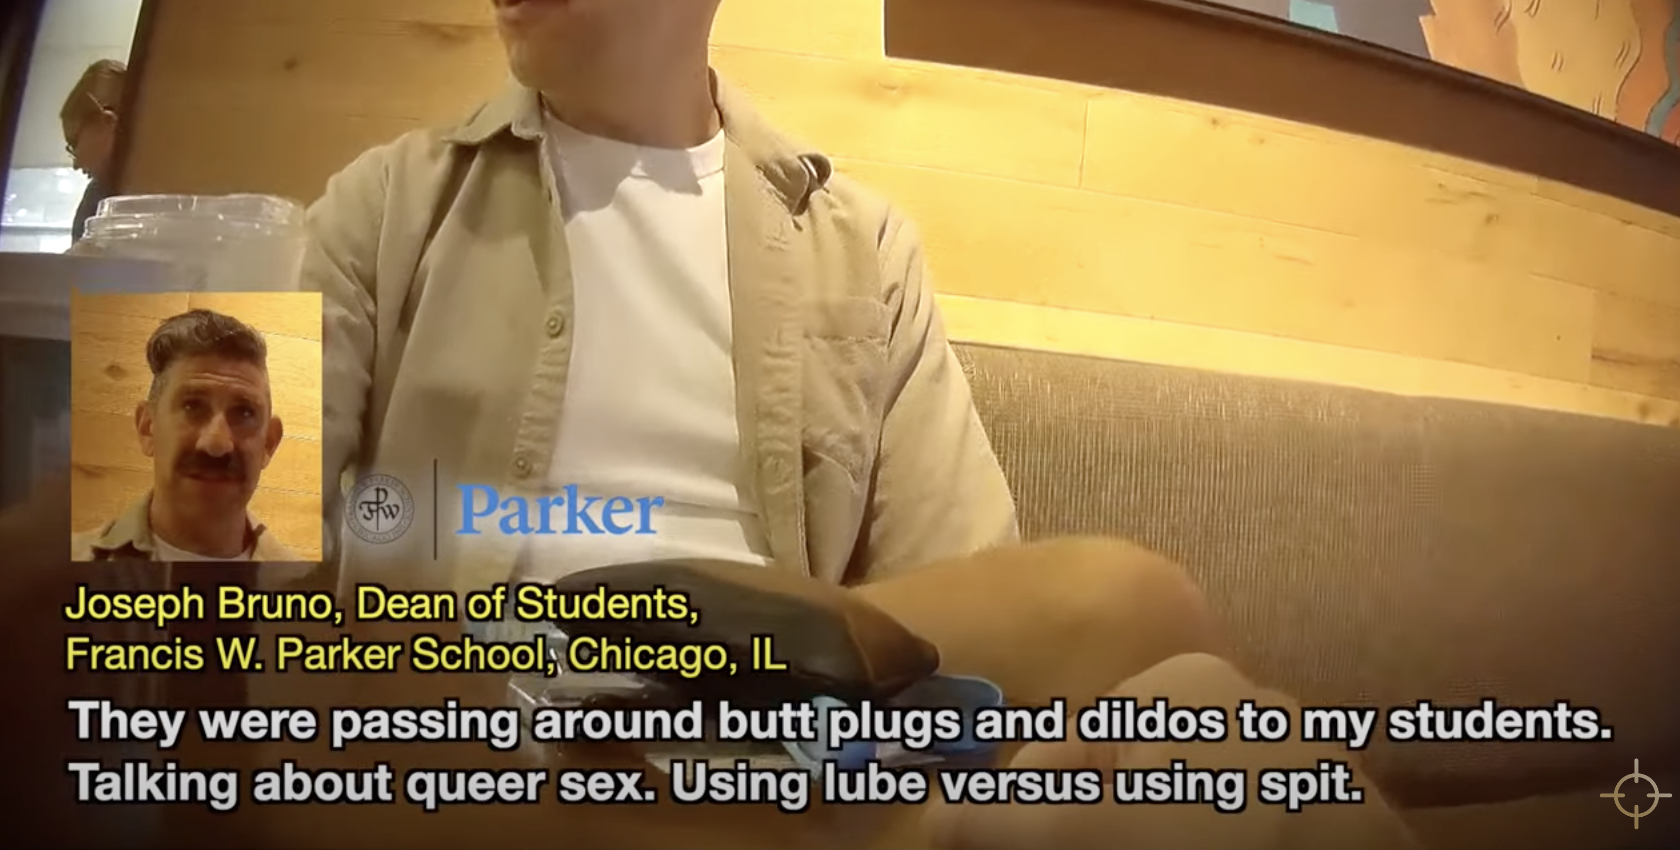 Elite Chicago Private School’s Dean Of Students Brags About Bringing In LGBTQ+ Health Center To Teach ‘Queer Sex’ To Minors